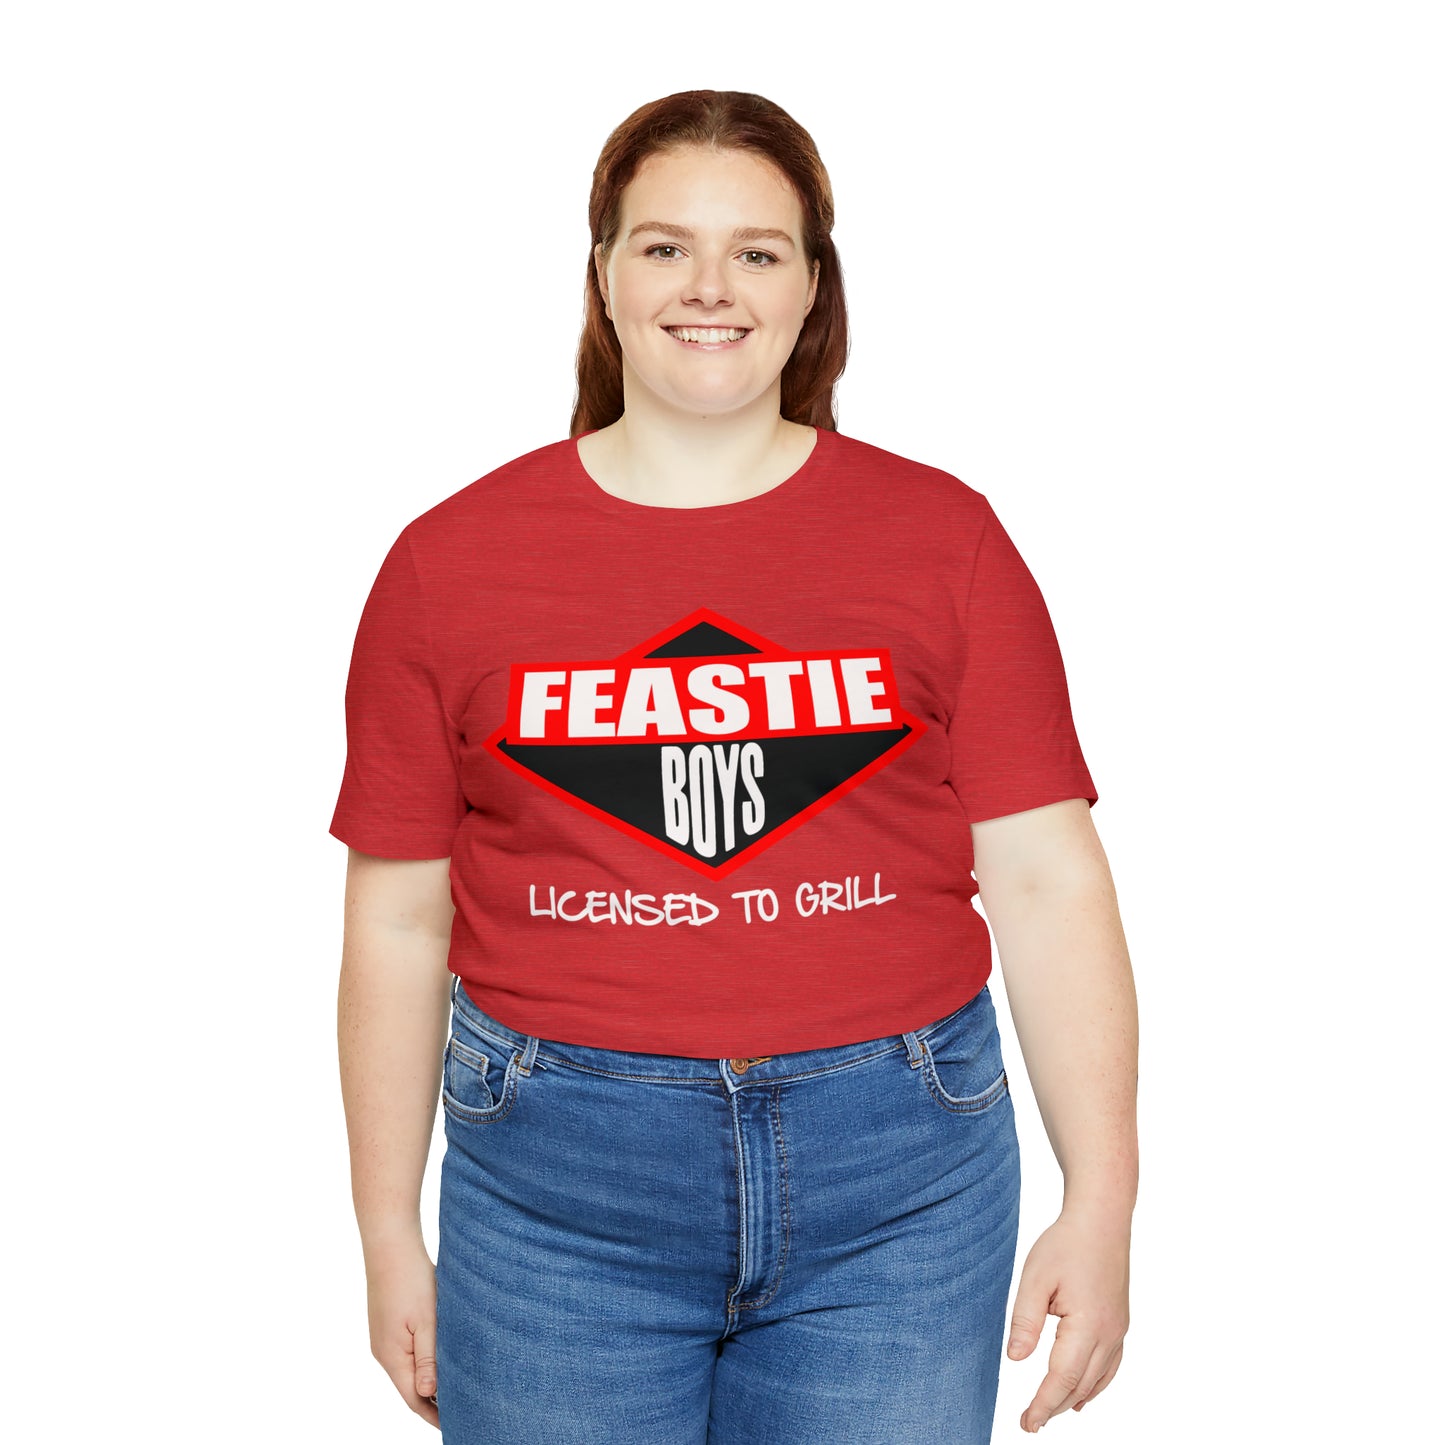 Feastie Boys - Licensed to Grill Tee